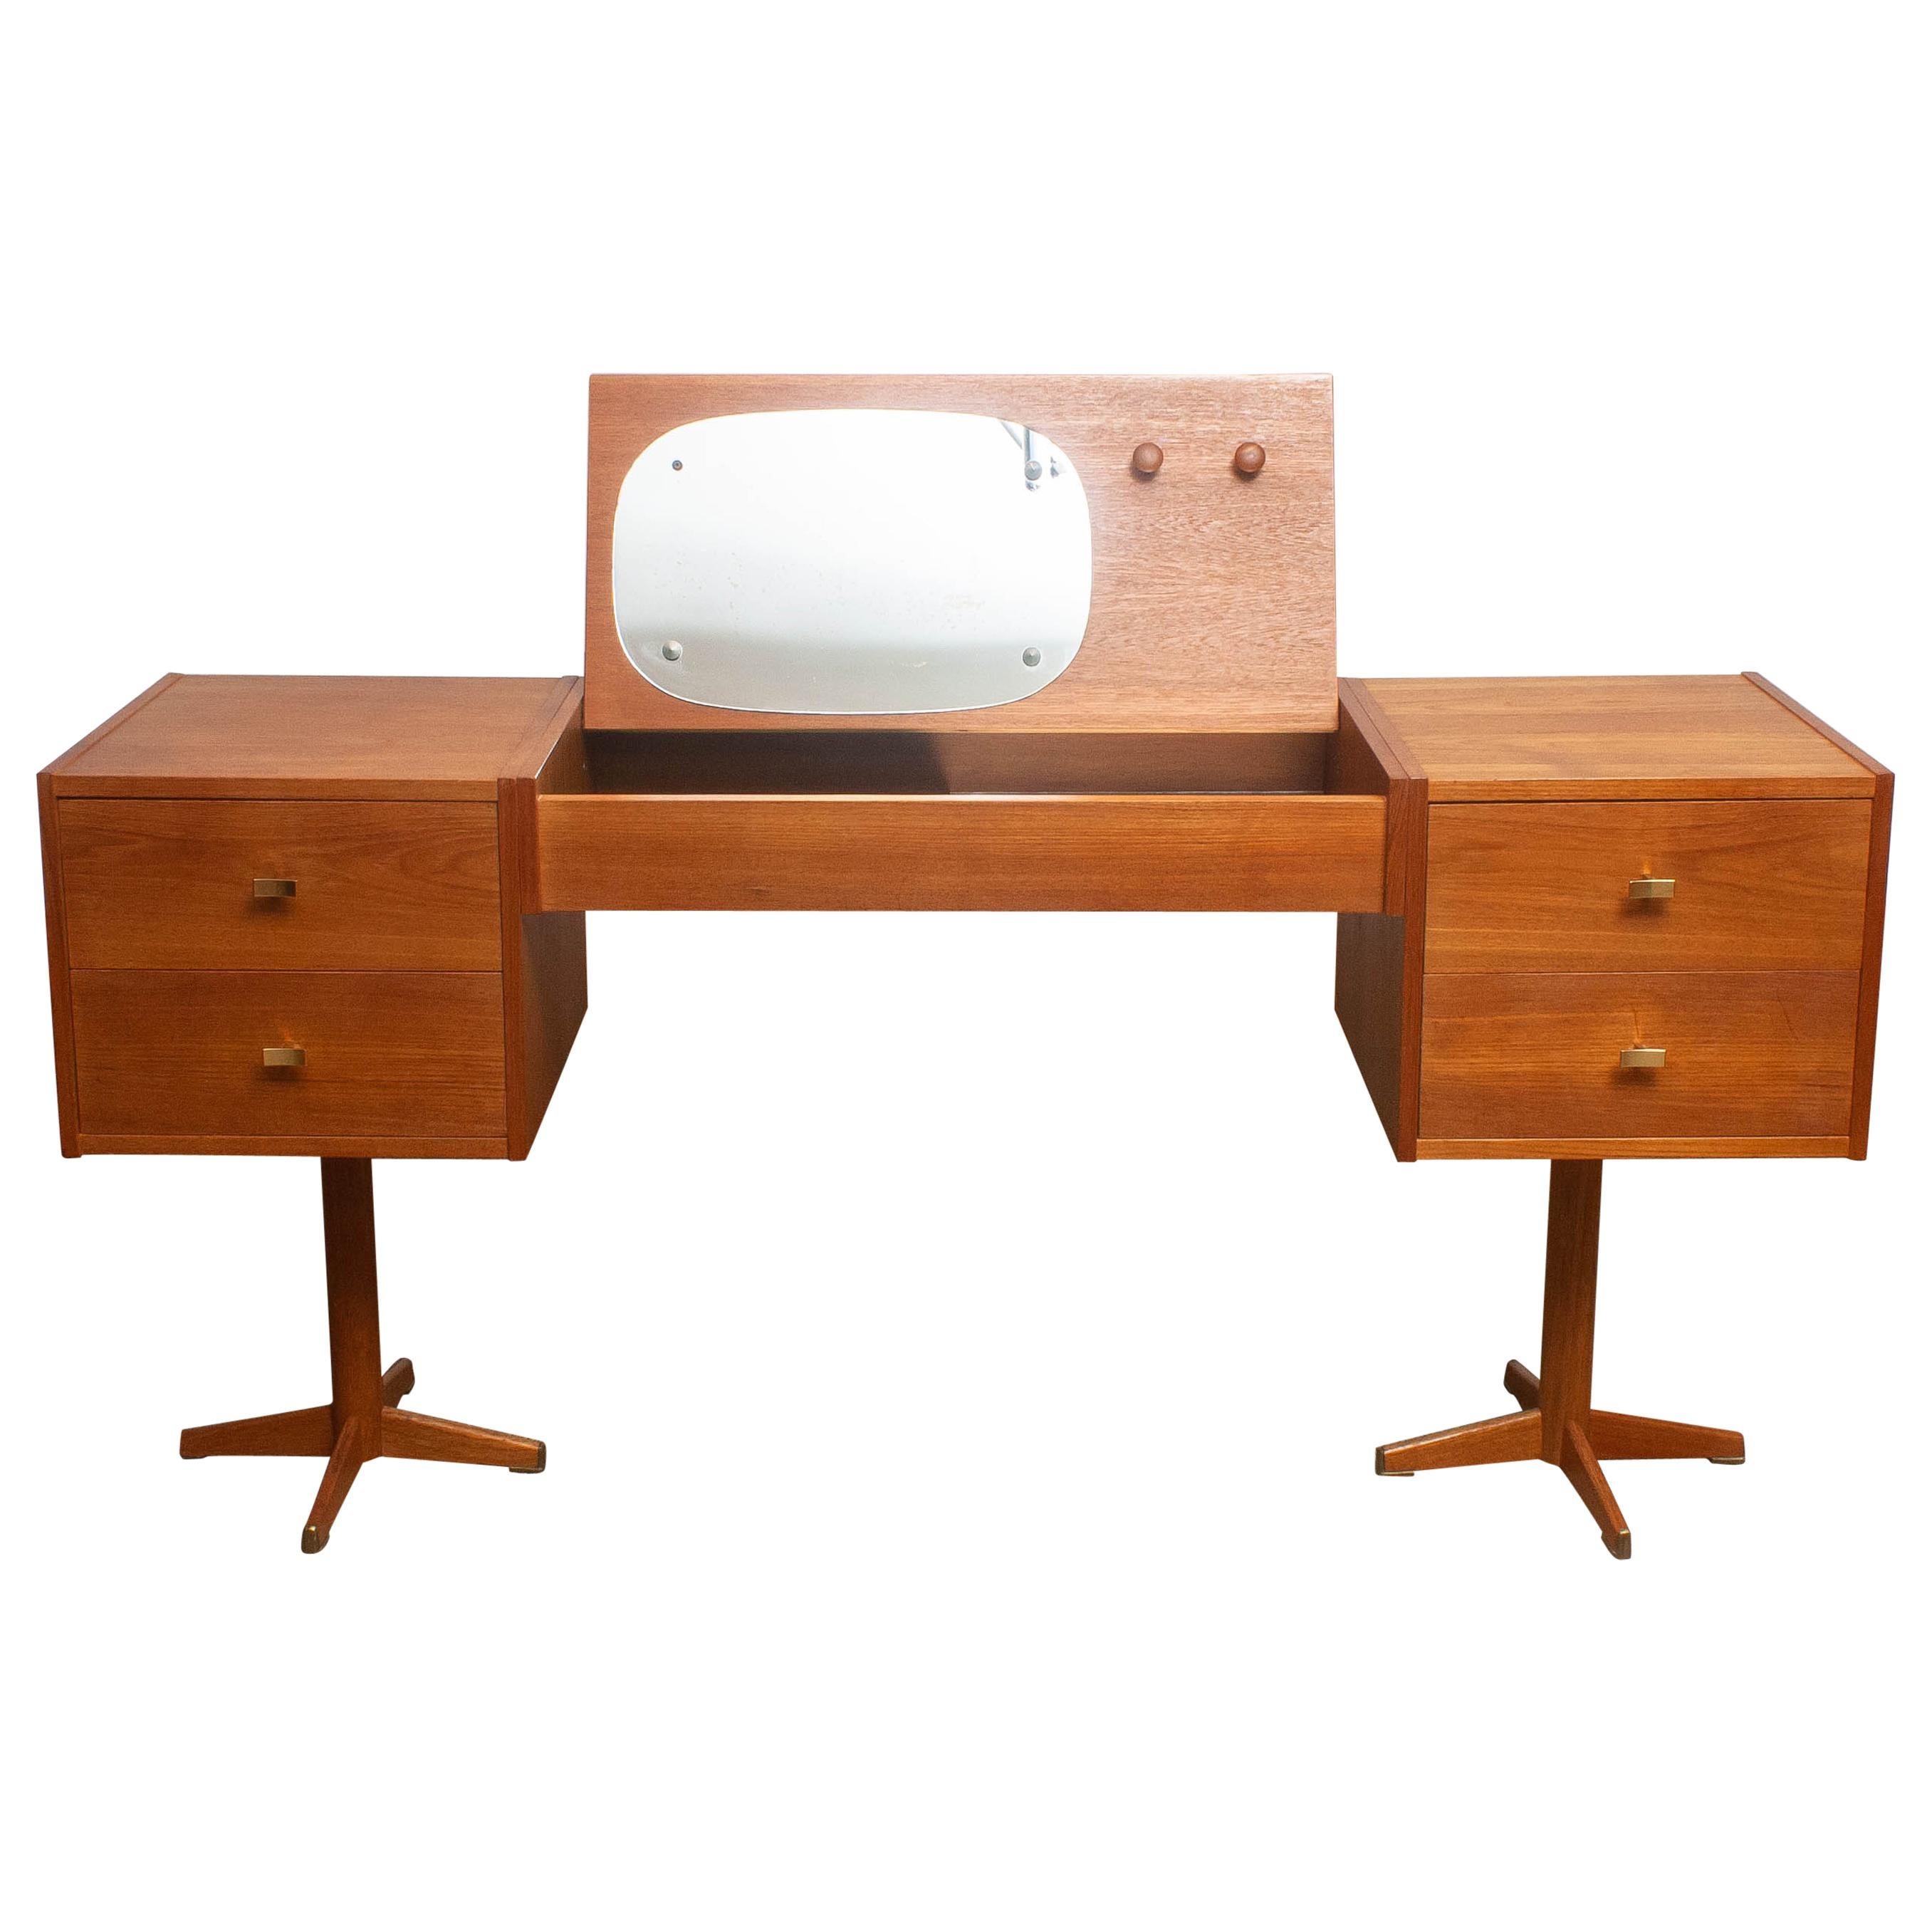 Beautiful vanity desk made in Scandinavian Sweden.
This piece is in a very nice and good condition.
It is made of teak with four drawers with brass handles and in the top a flap with storage space and mirrors and hanging knobs.
The legs are